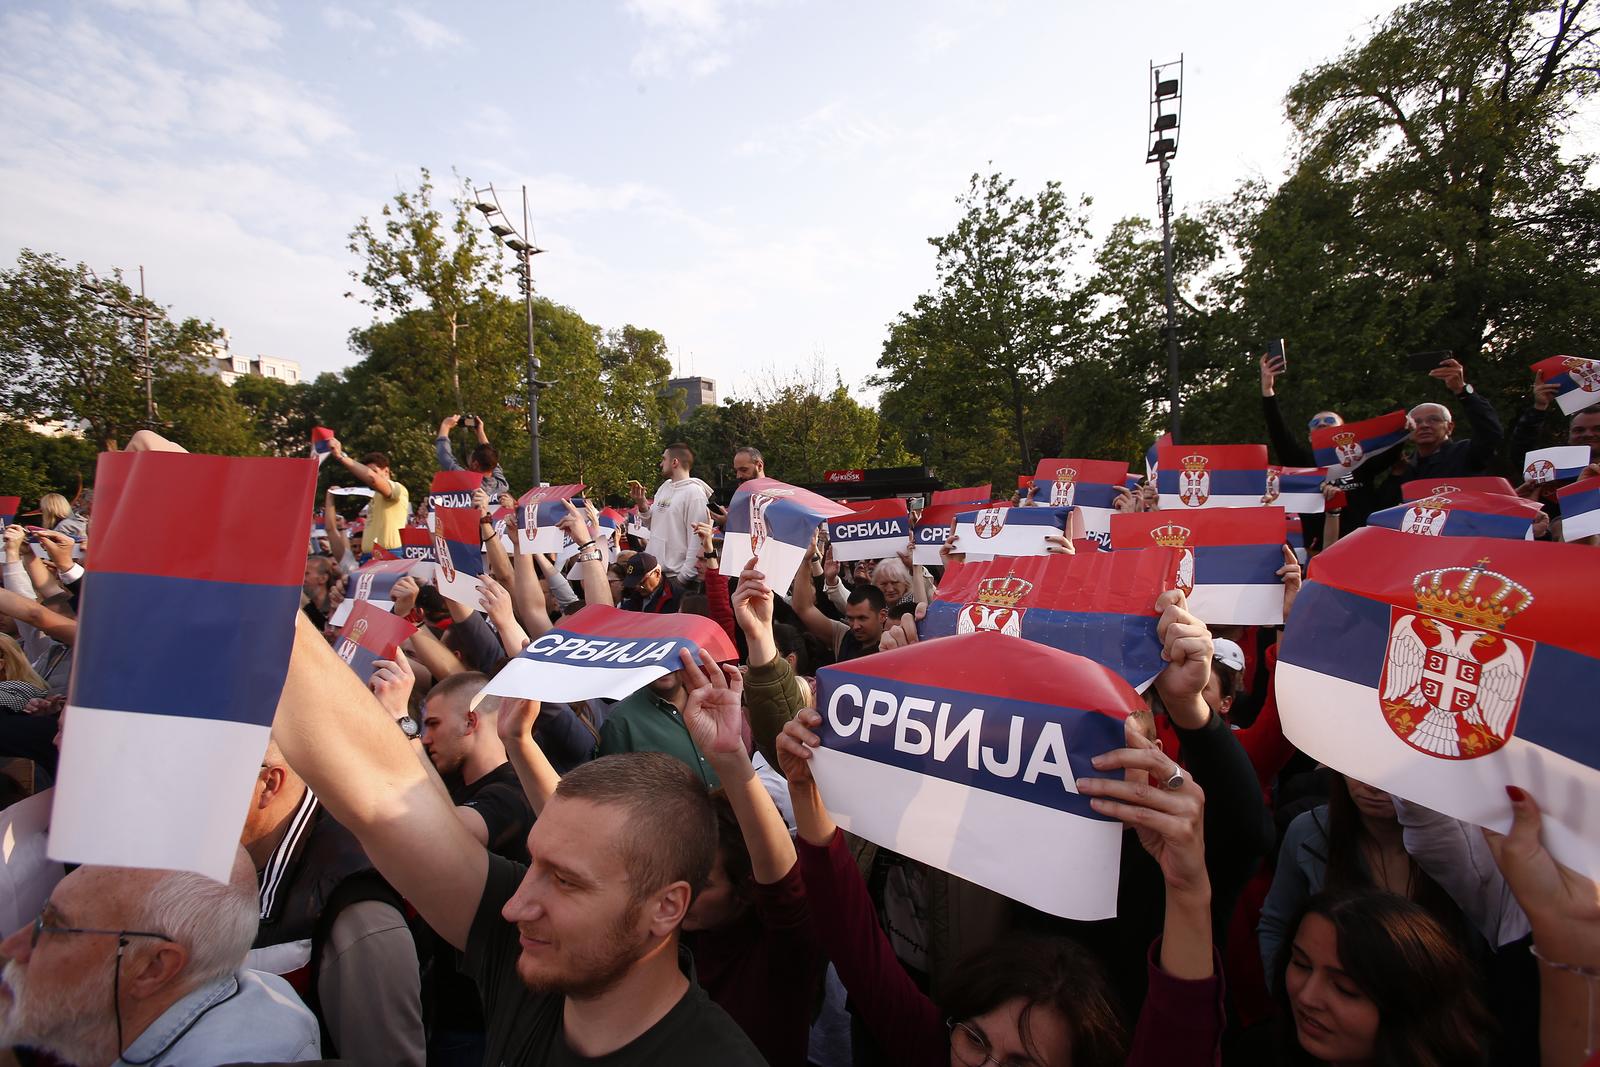 19, May, 2023, Belgrade - In front of the House of the National Assembly, the third protest called "Serbia against violence" started, organized by a part of the pro-European opposition parties. Photo: Amir Hamzagic/ATAImages

19, maj, 2023, Beograd  - Ispred Doma narodne skupstine poceo je treci protest pod nazivom "Srbija protiv nasilja" u organizaciji dela proevropskih opozicionih stranaka. Photo: Amir Hamzagic/ATAImages Photo: Amir Hamzagic/ATAImages/PIXSELL